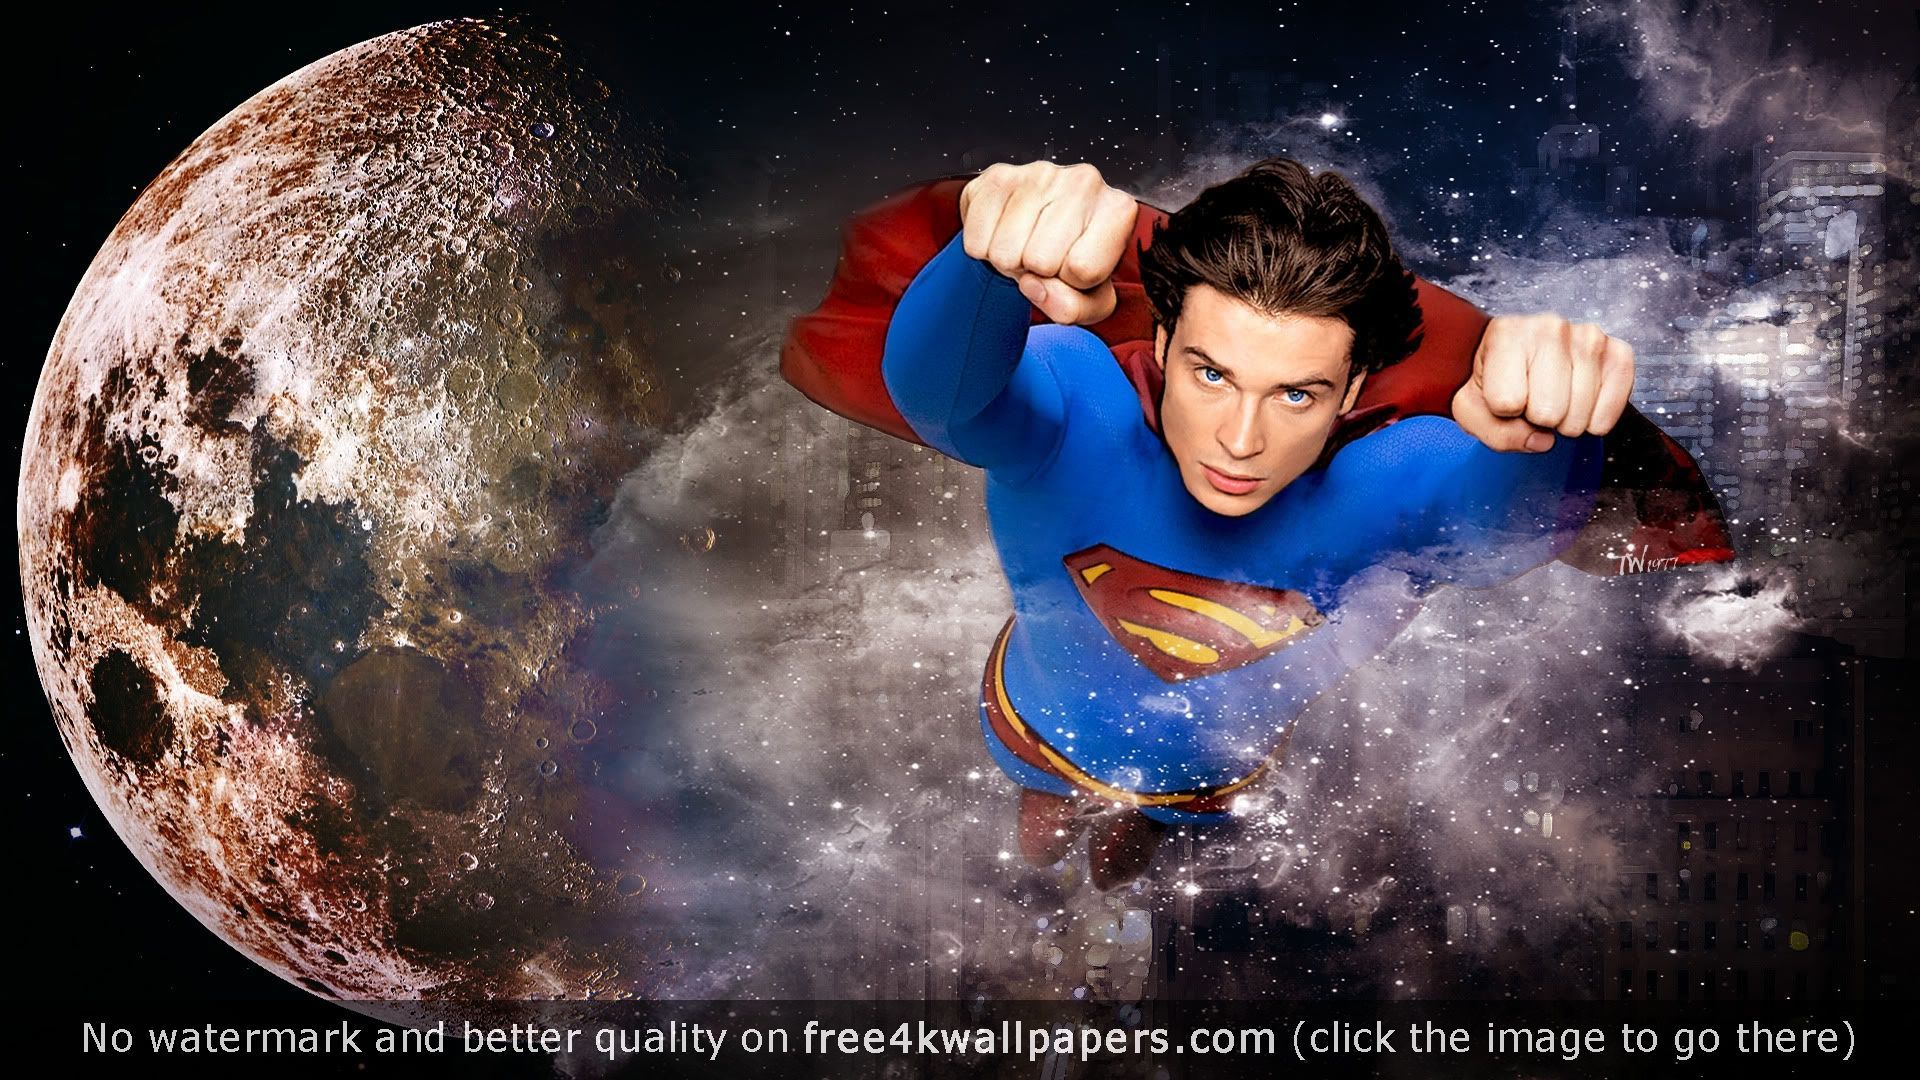 Superman Wallpaper For Desktop And Mobile Devices